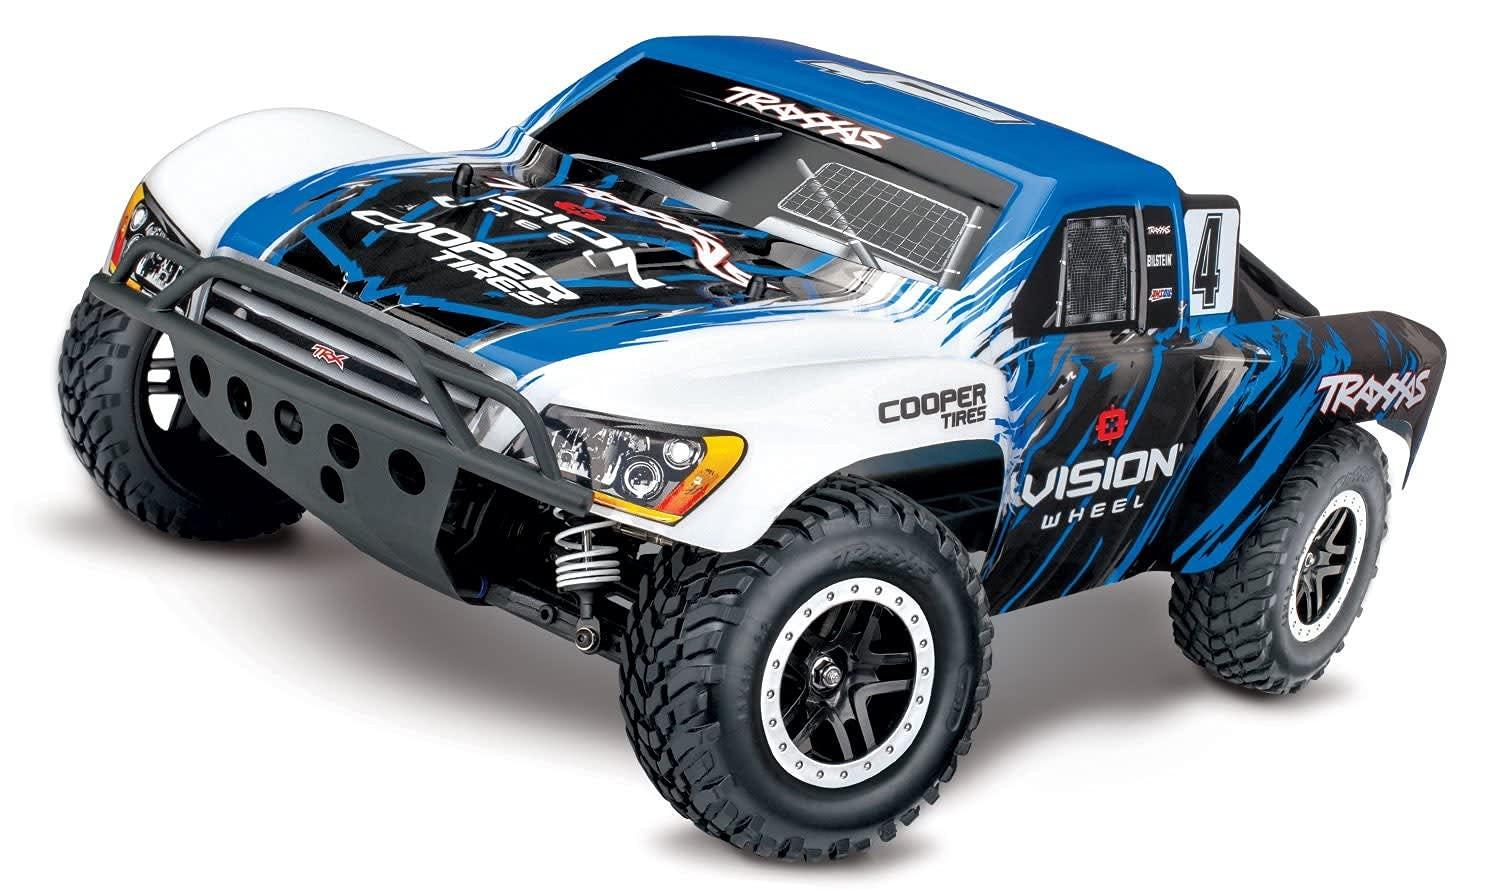 Traxxas Rc Cars Under $100: Affordable and Feature-Packed Traxxas RC Cars Under $100